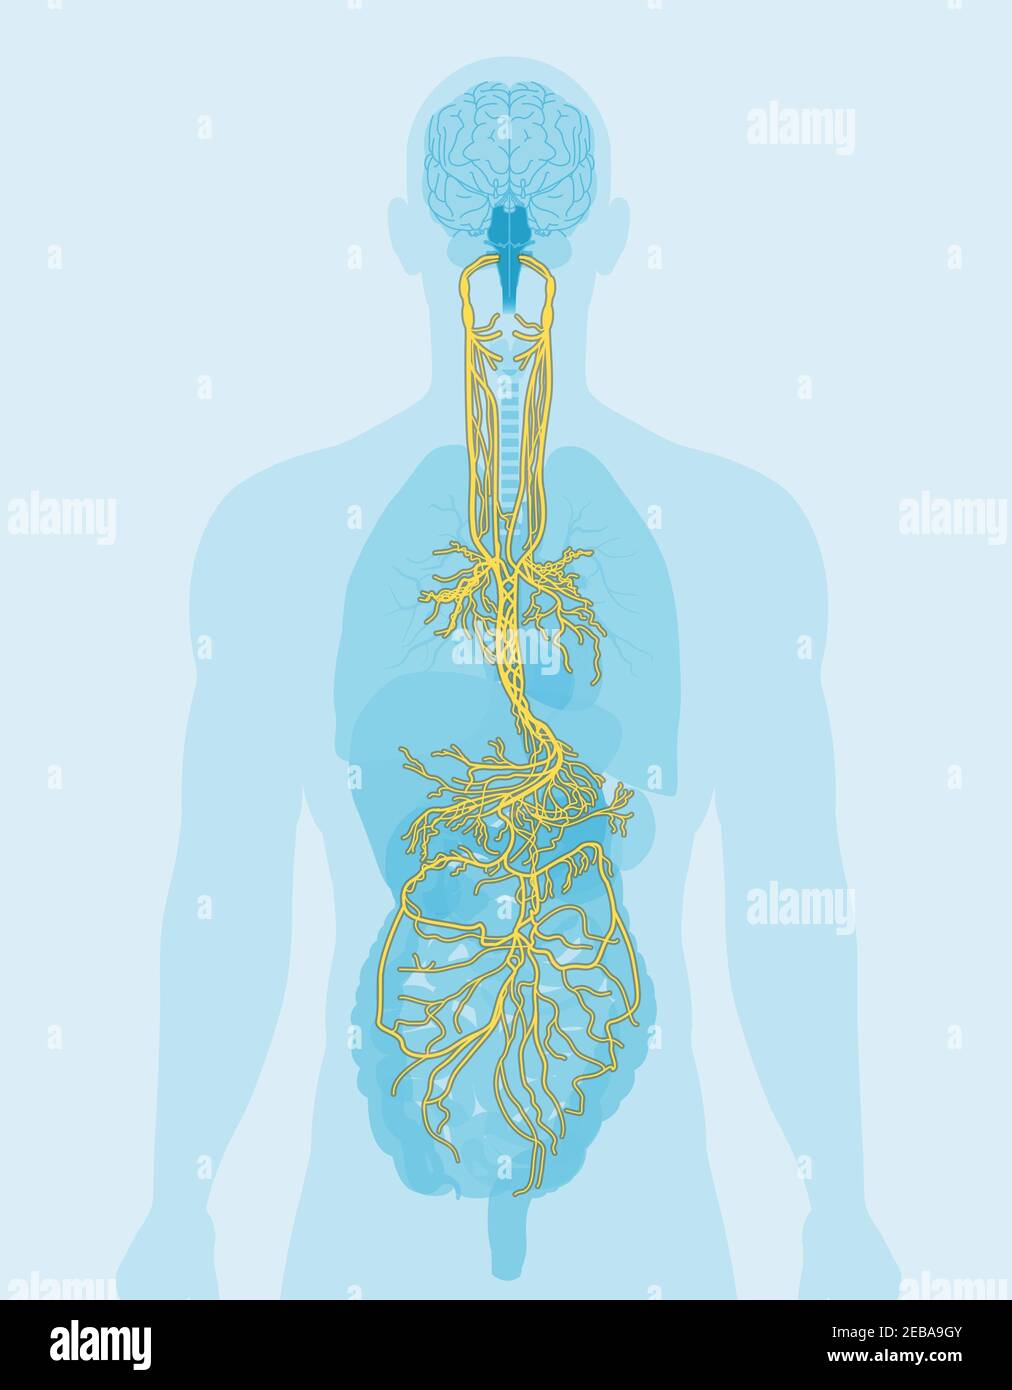 Illustration showing brain and vagus nerve (tenth cranial nerve or CN X) with human organs Stock Photo